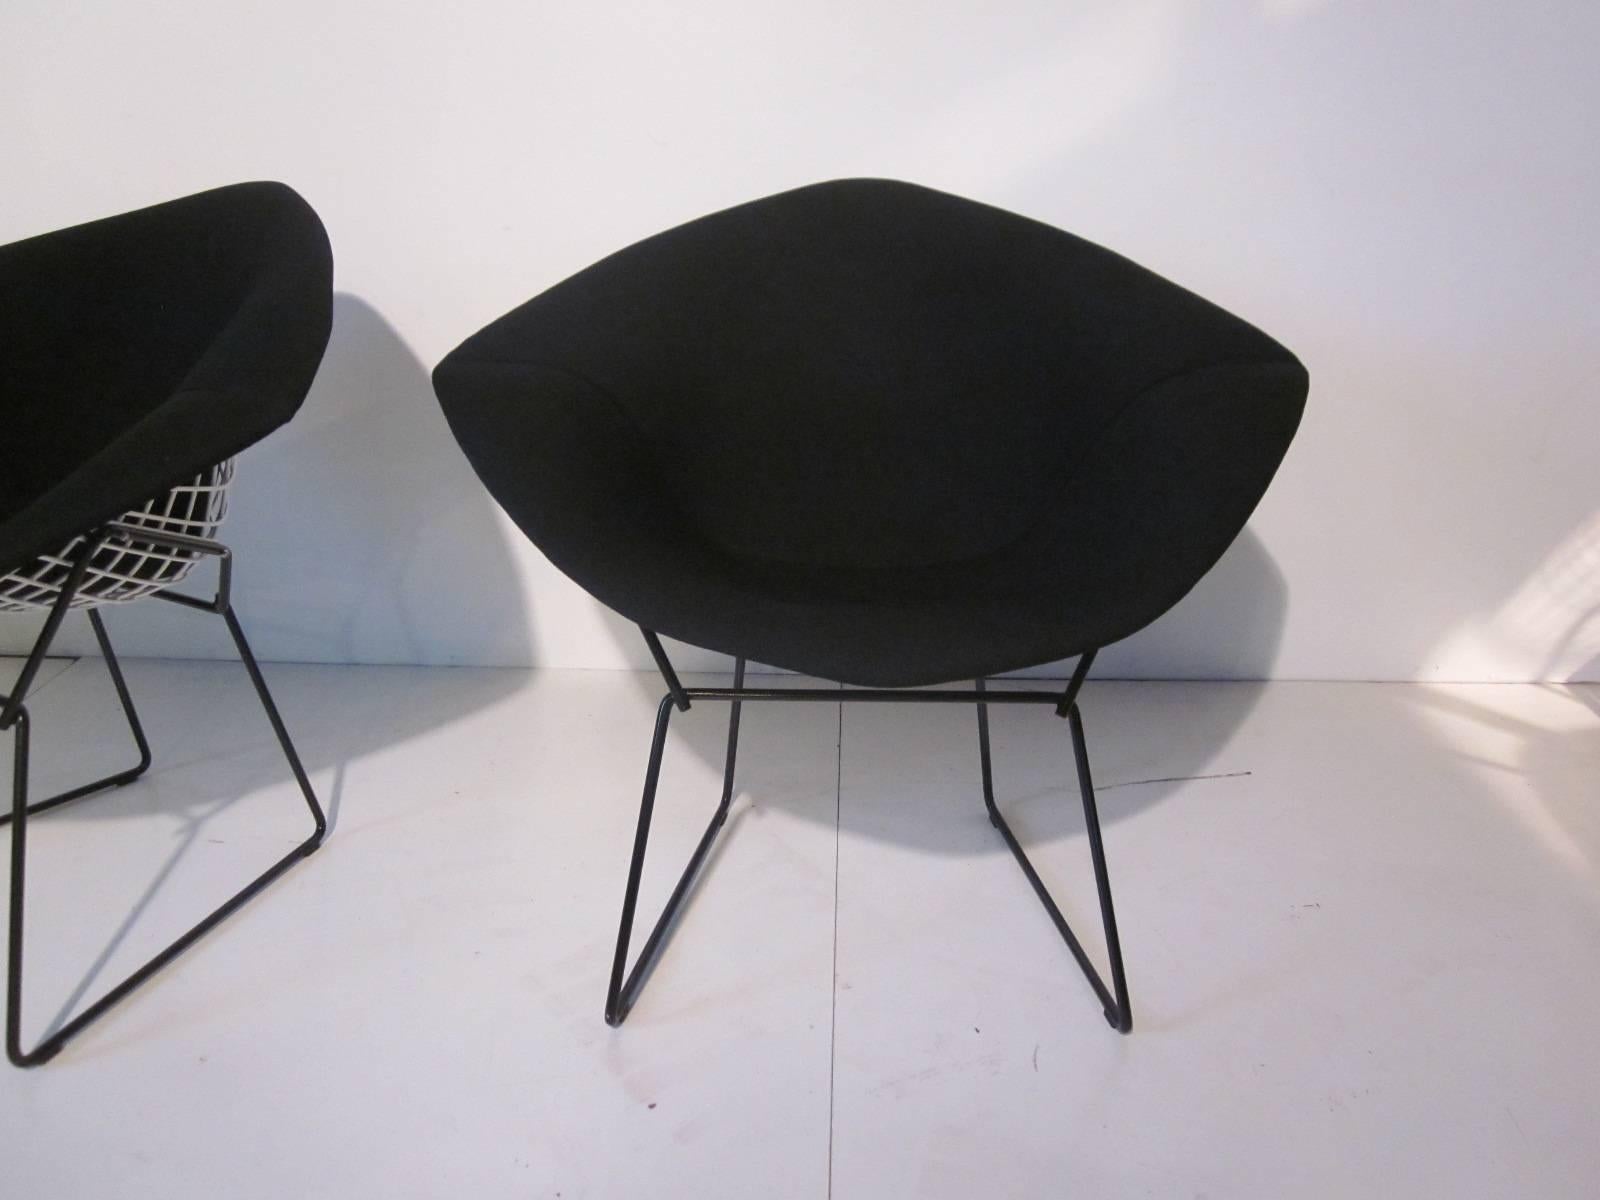 A pair of Bertoia small diamond chairs with white coated seat frame, black blended soft wool type covers sitting on black coated legs. A Classic design with a sculptural presence and comfortable to relax in. Retains the fabric tag from Knoll